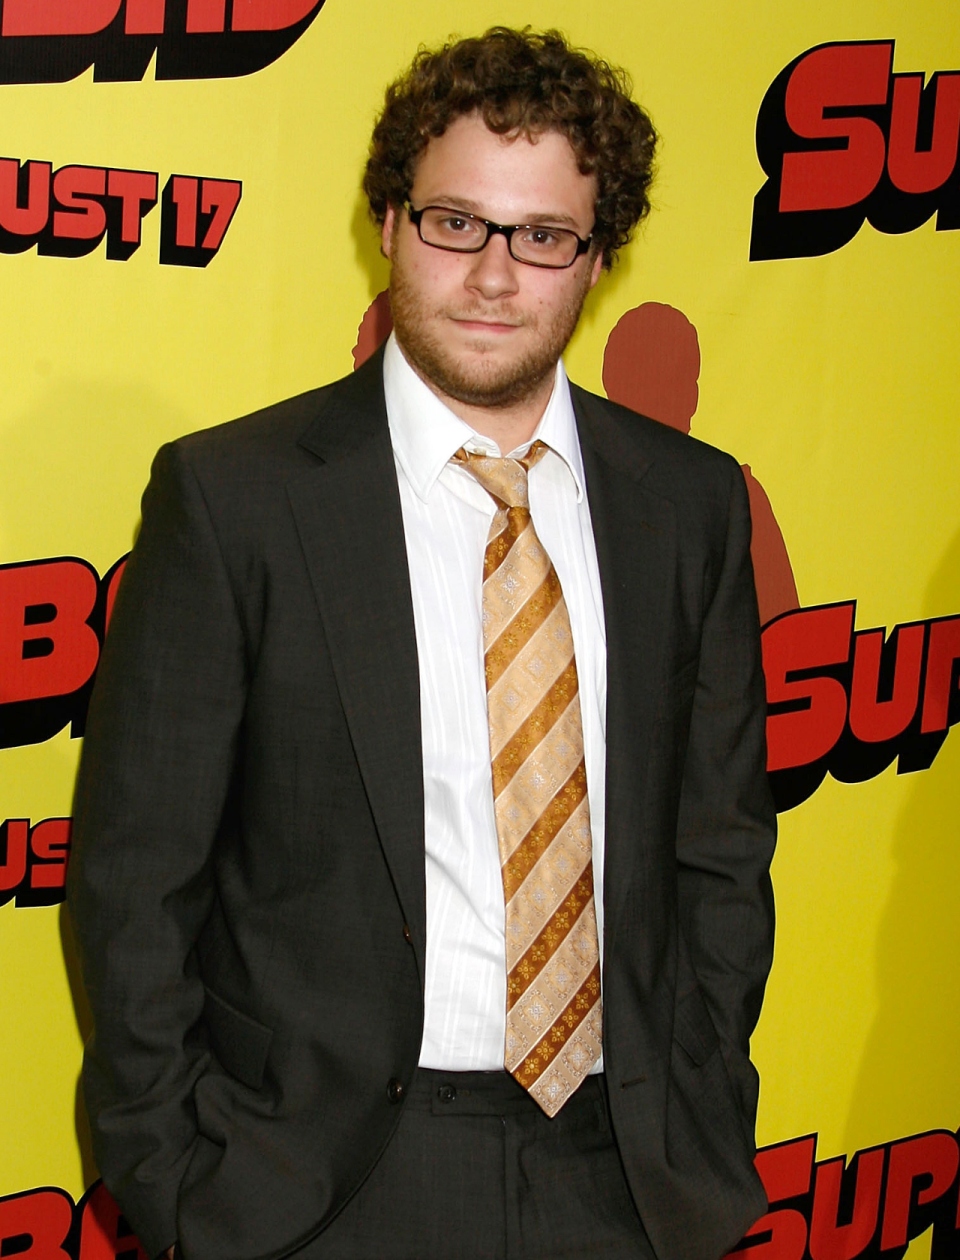 Seth Rogen attends the Los Angeles premiere of Superbad